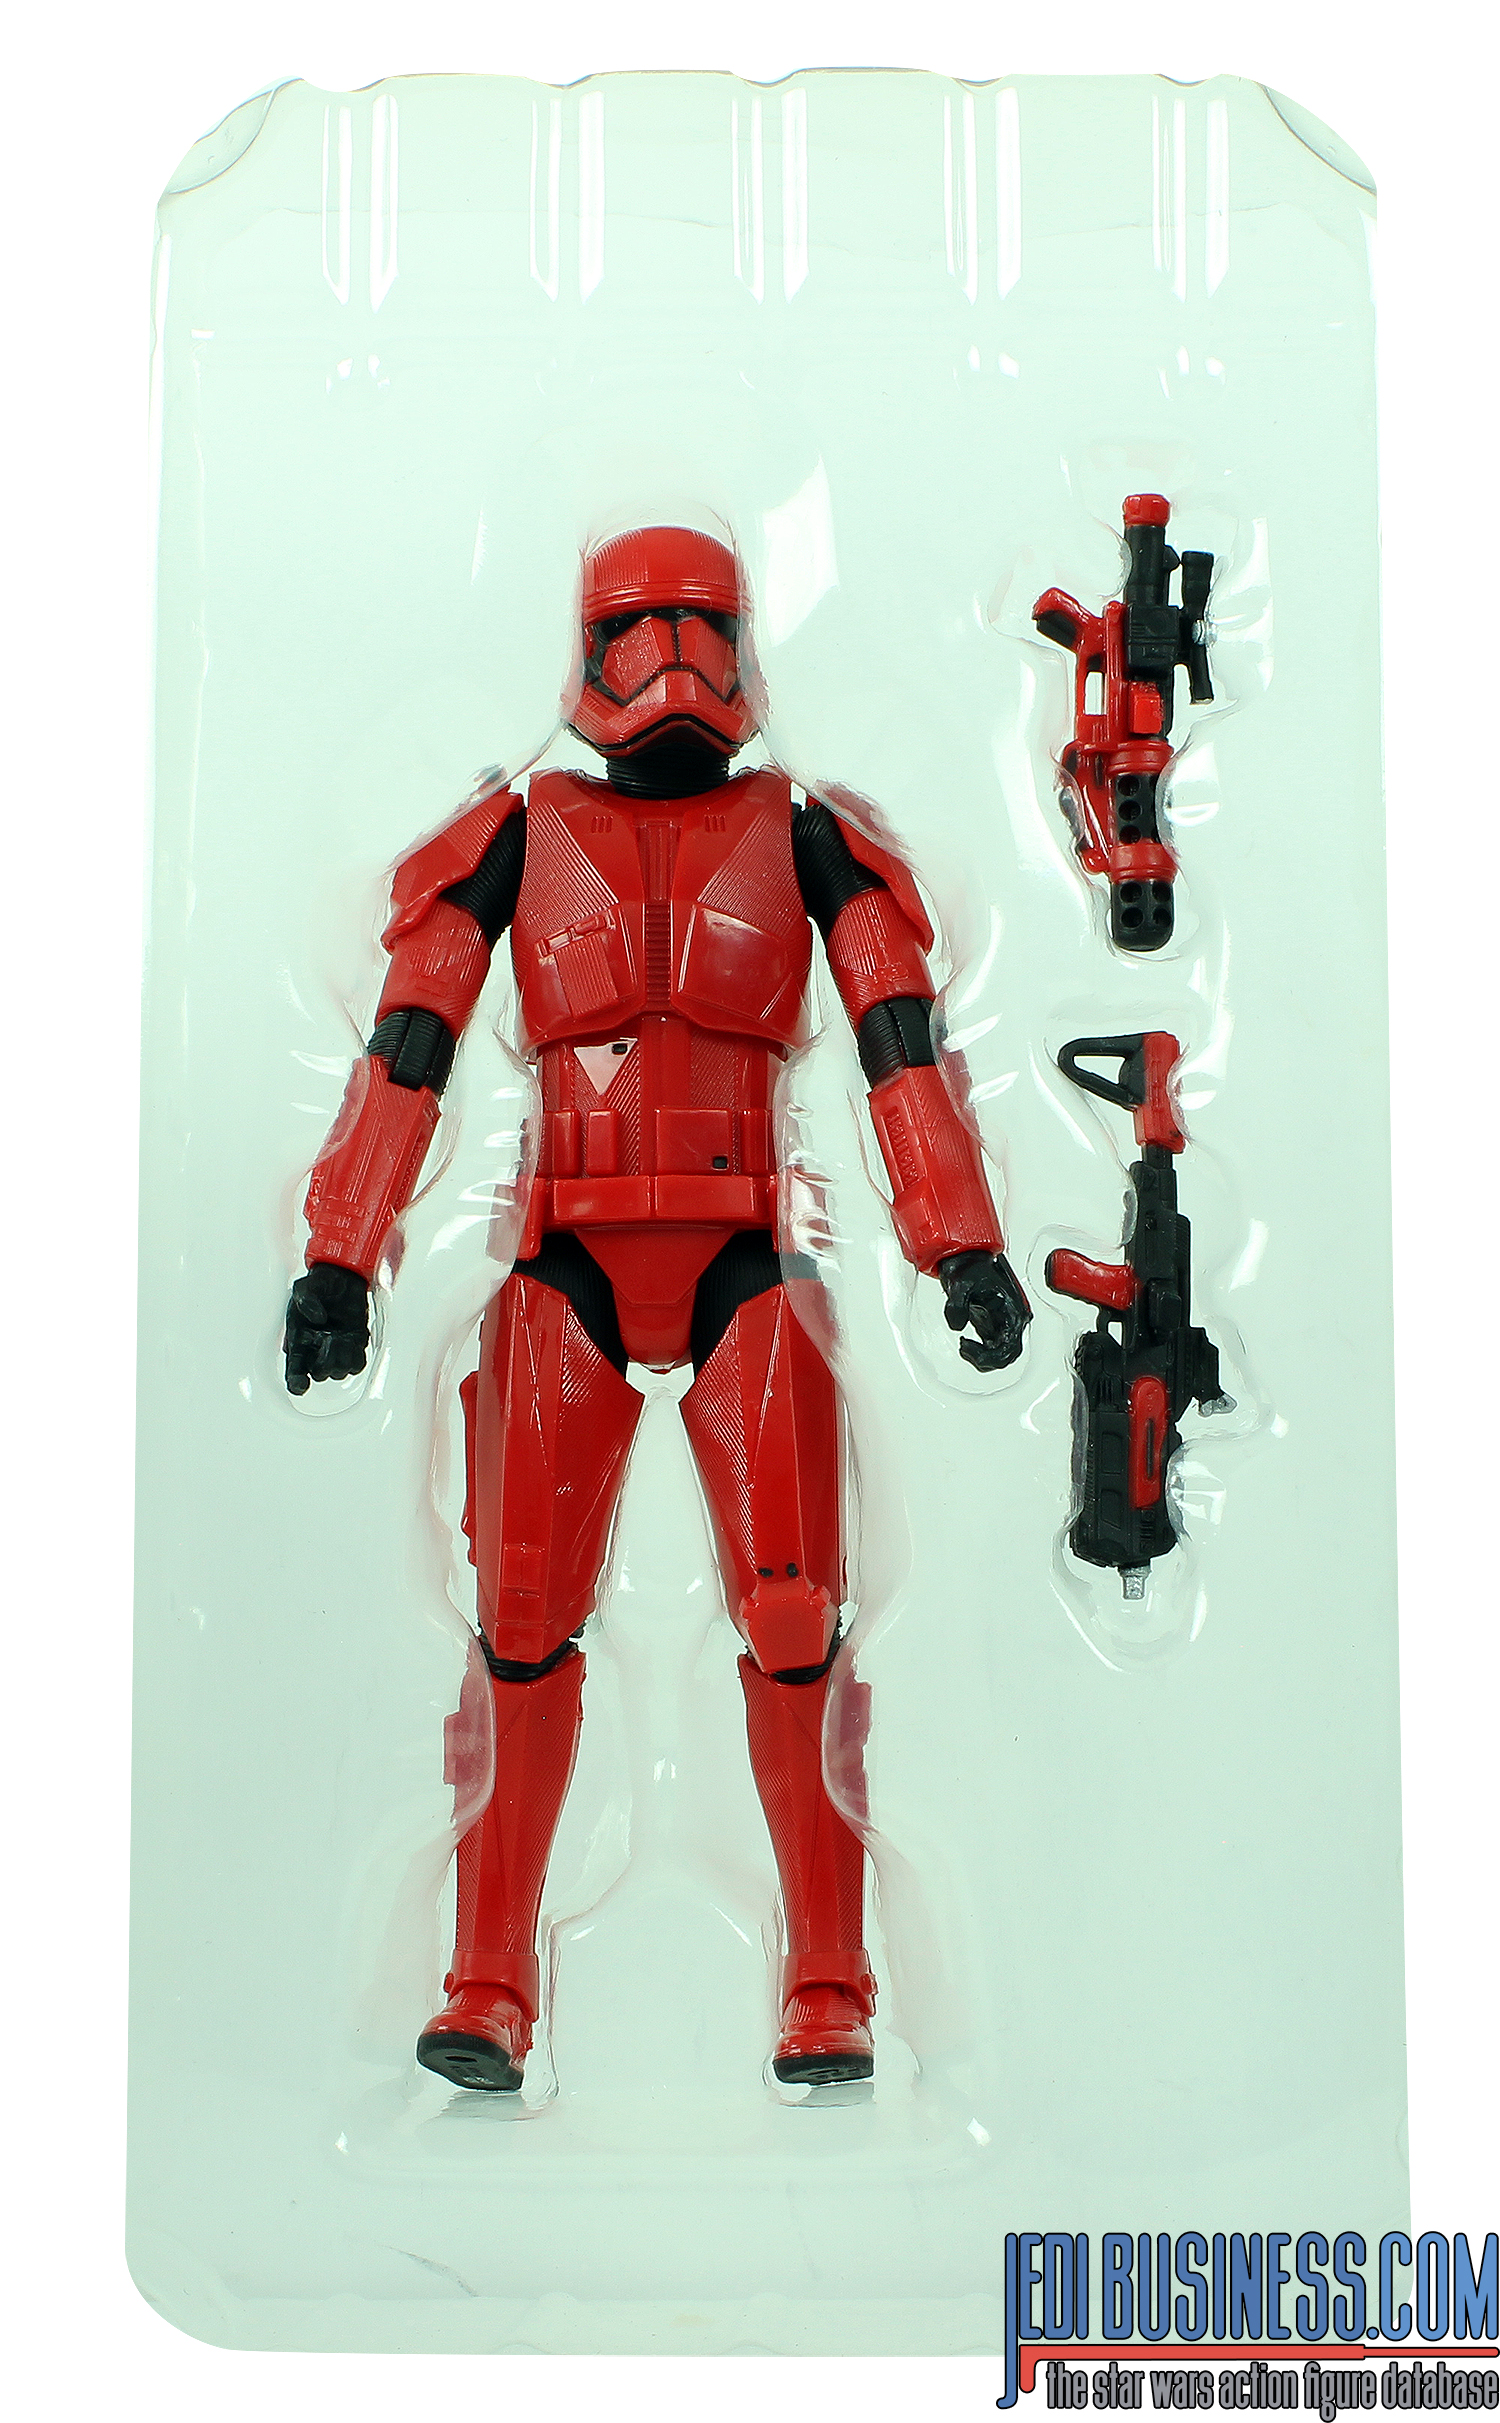 Sith Trooper First Edition